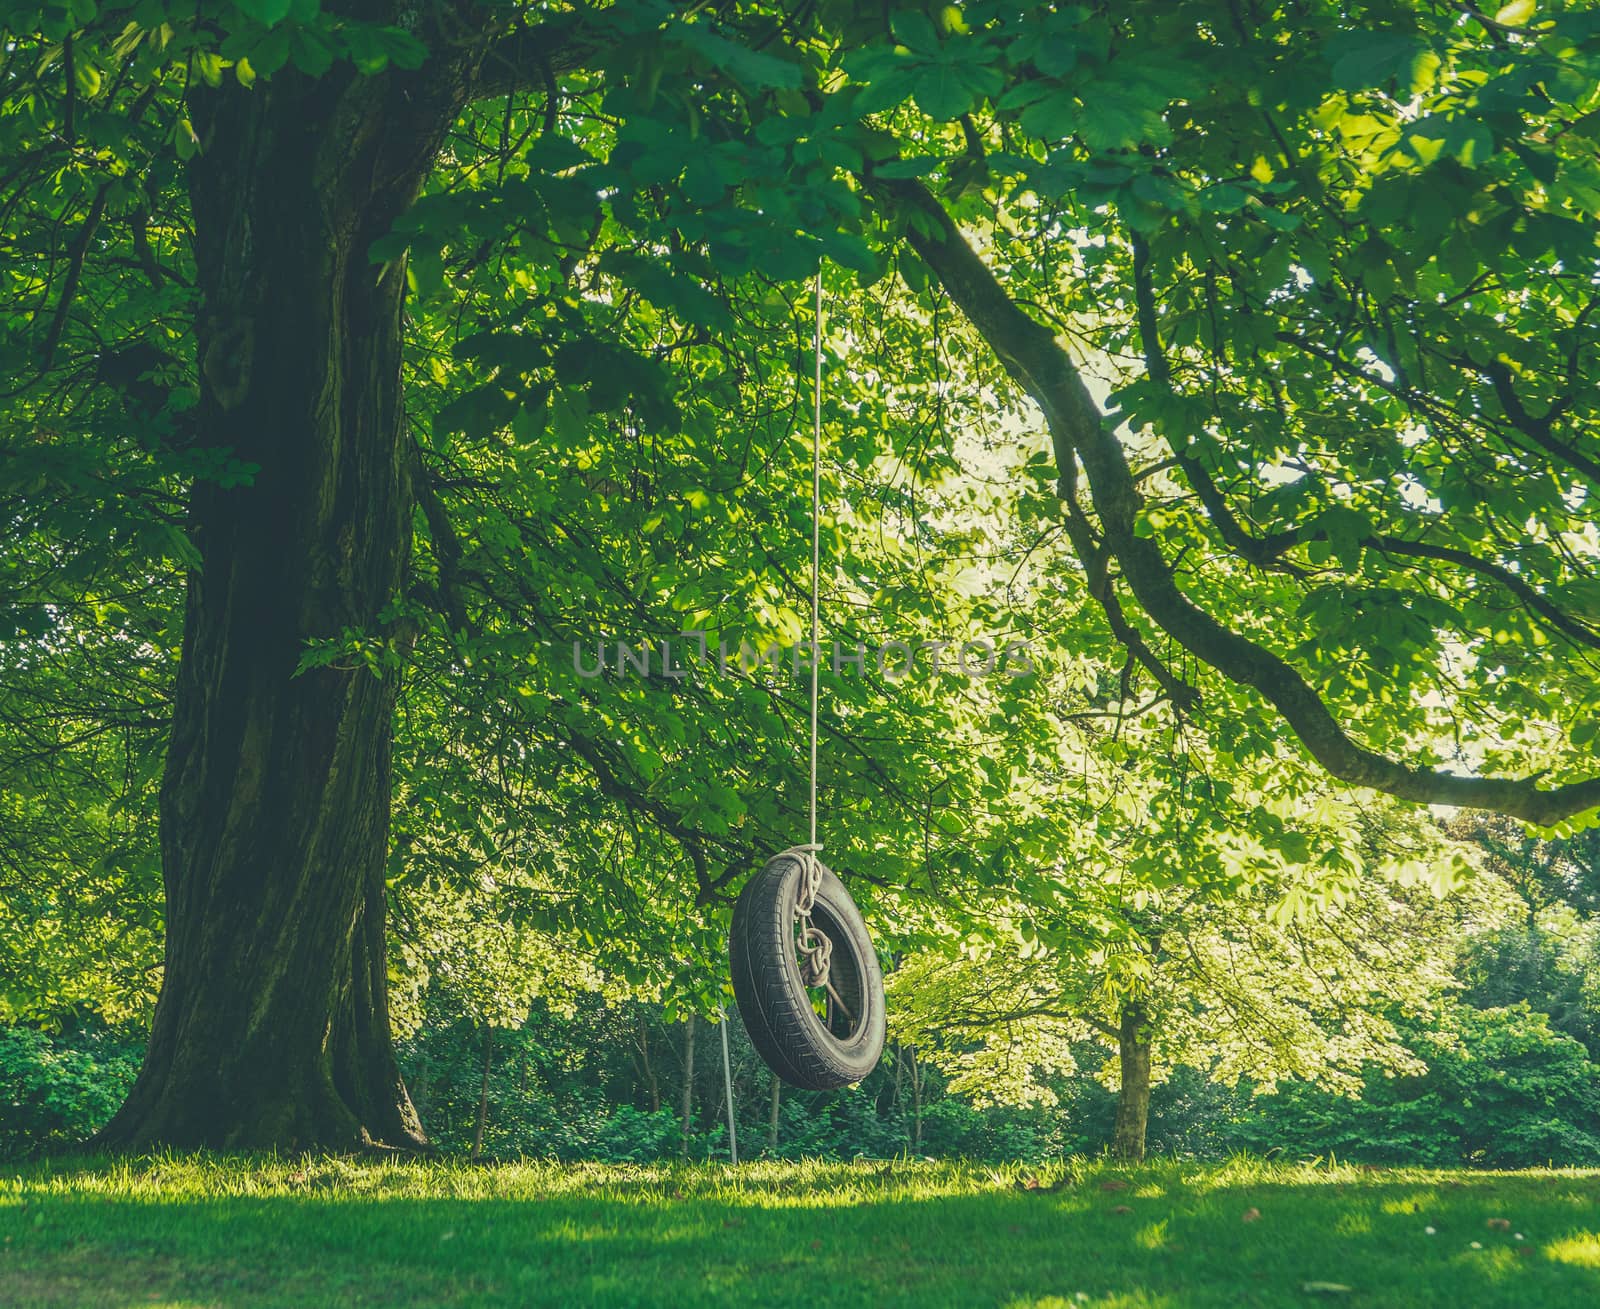 Large Tree With Tire Swing by mrdoomits